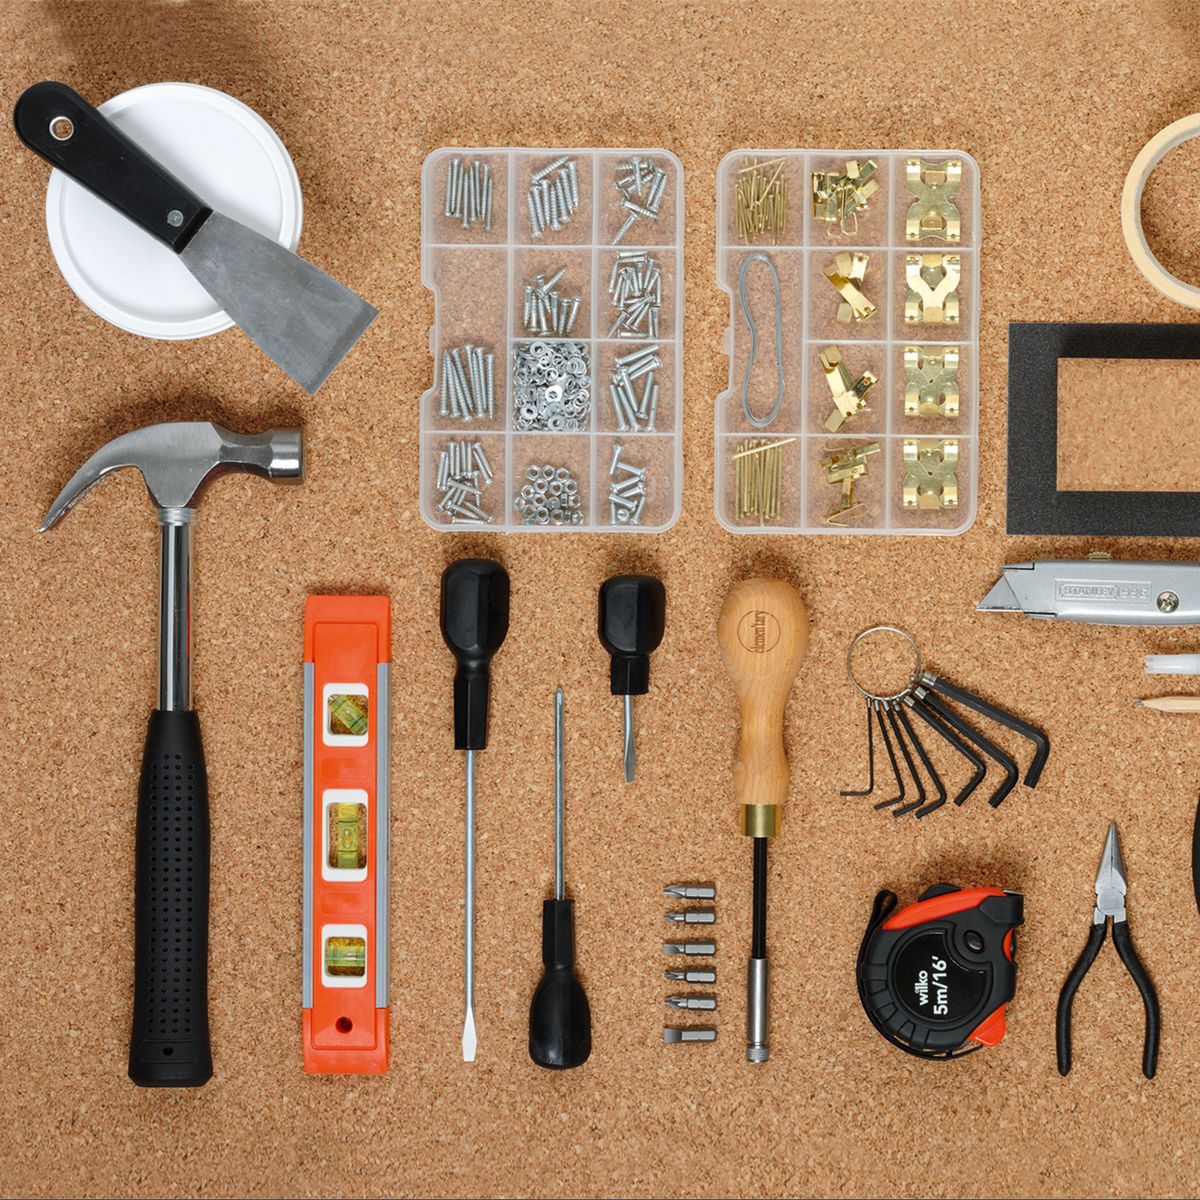 11 Must Have Tools in a Basic Toolkit (Plus 18 advanced tools